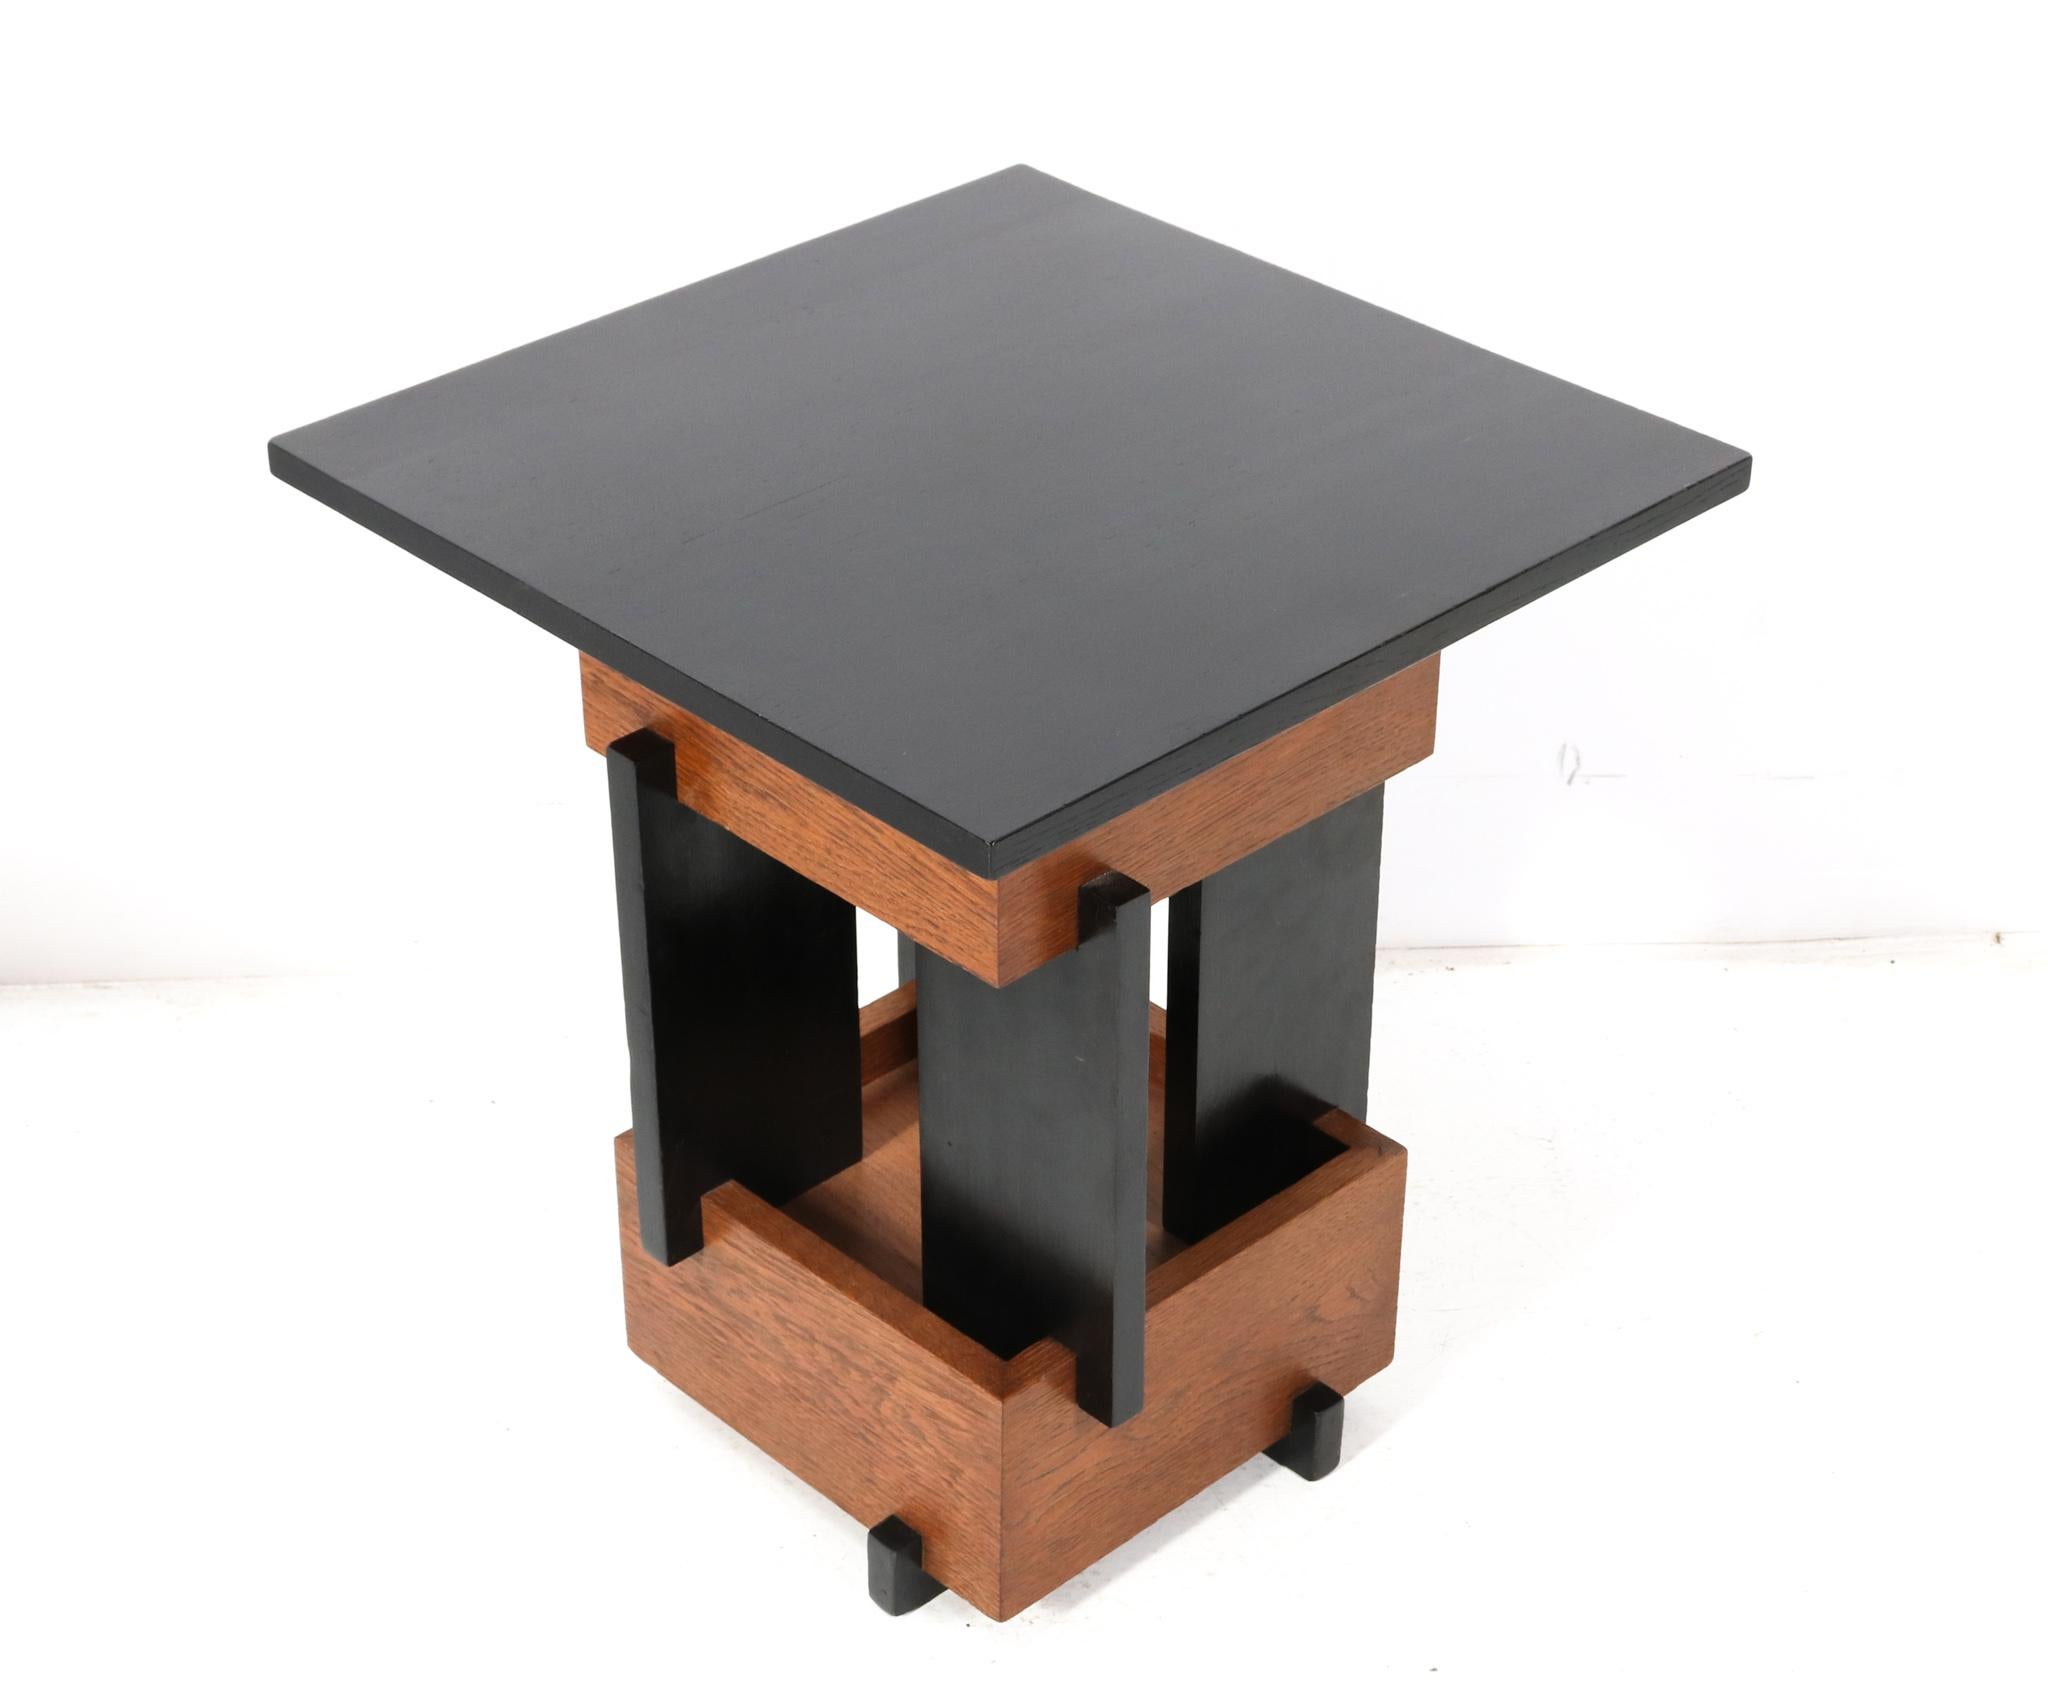 Lacquered Oak Art Deco Modernist Side Table by Cor Alons, 1930s For Sale